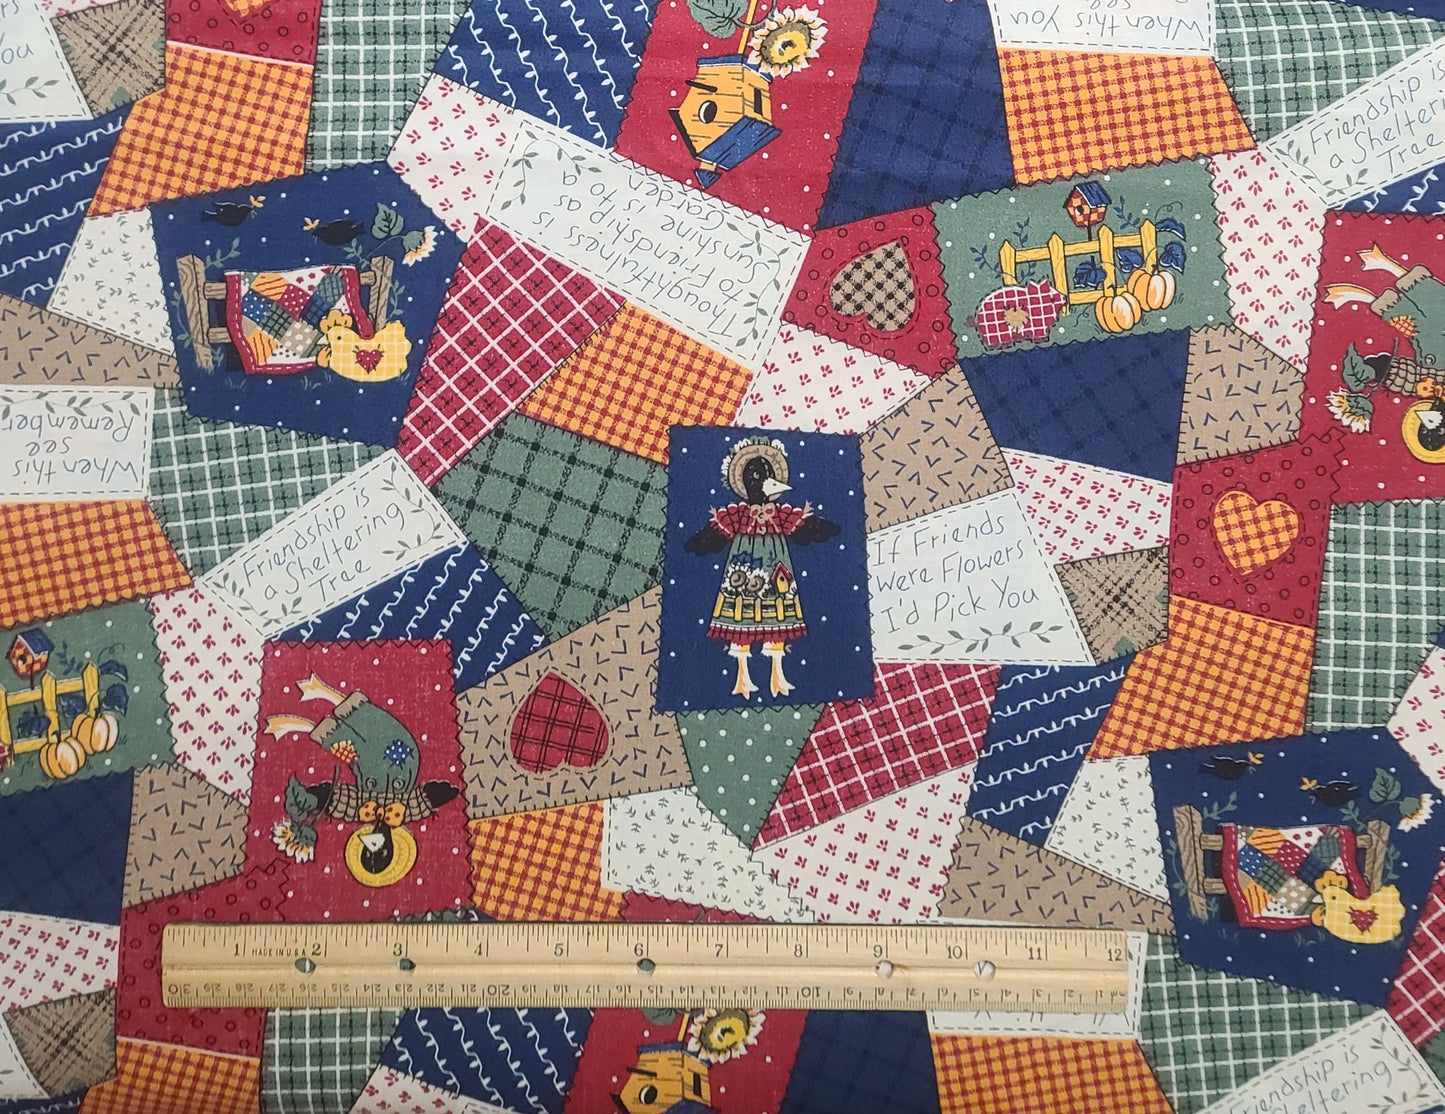 Fabric Traditions 1994 #5295 - Vintage Friendship Patchwork Cheatercloth Fabric